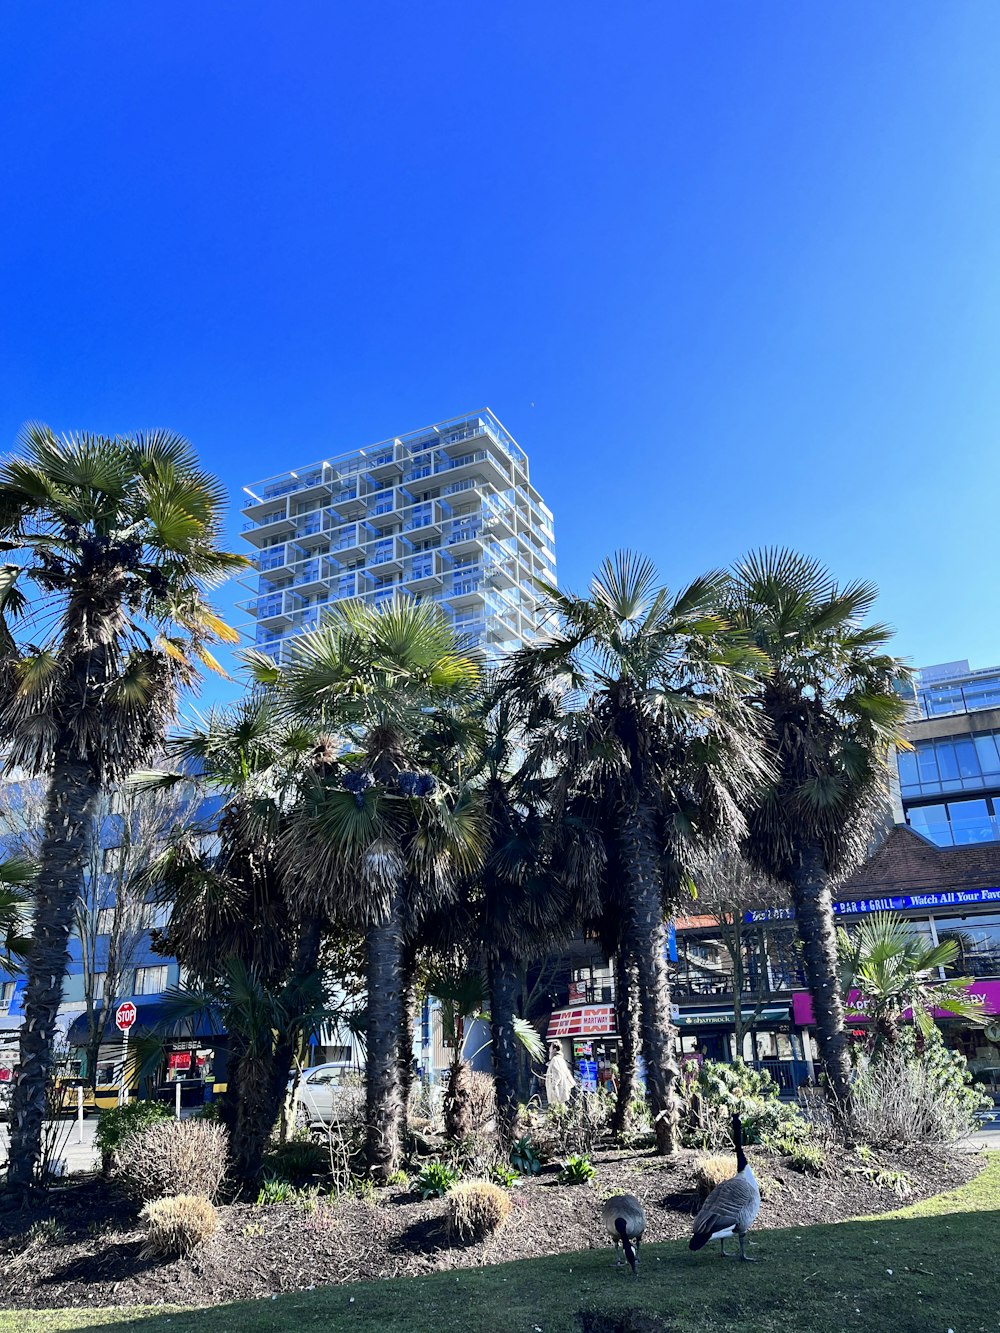 a tall building with palm trees